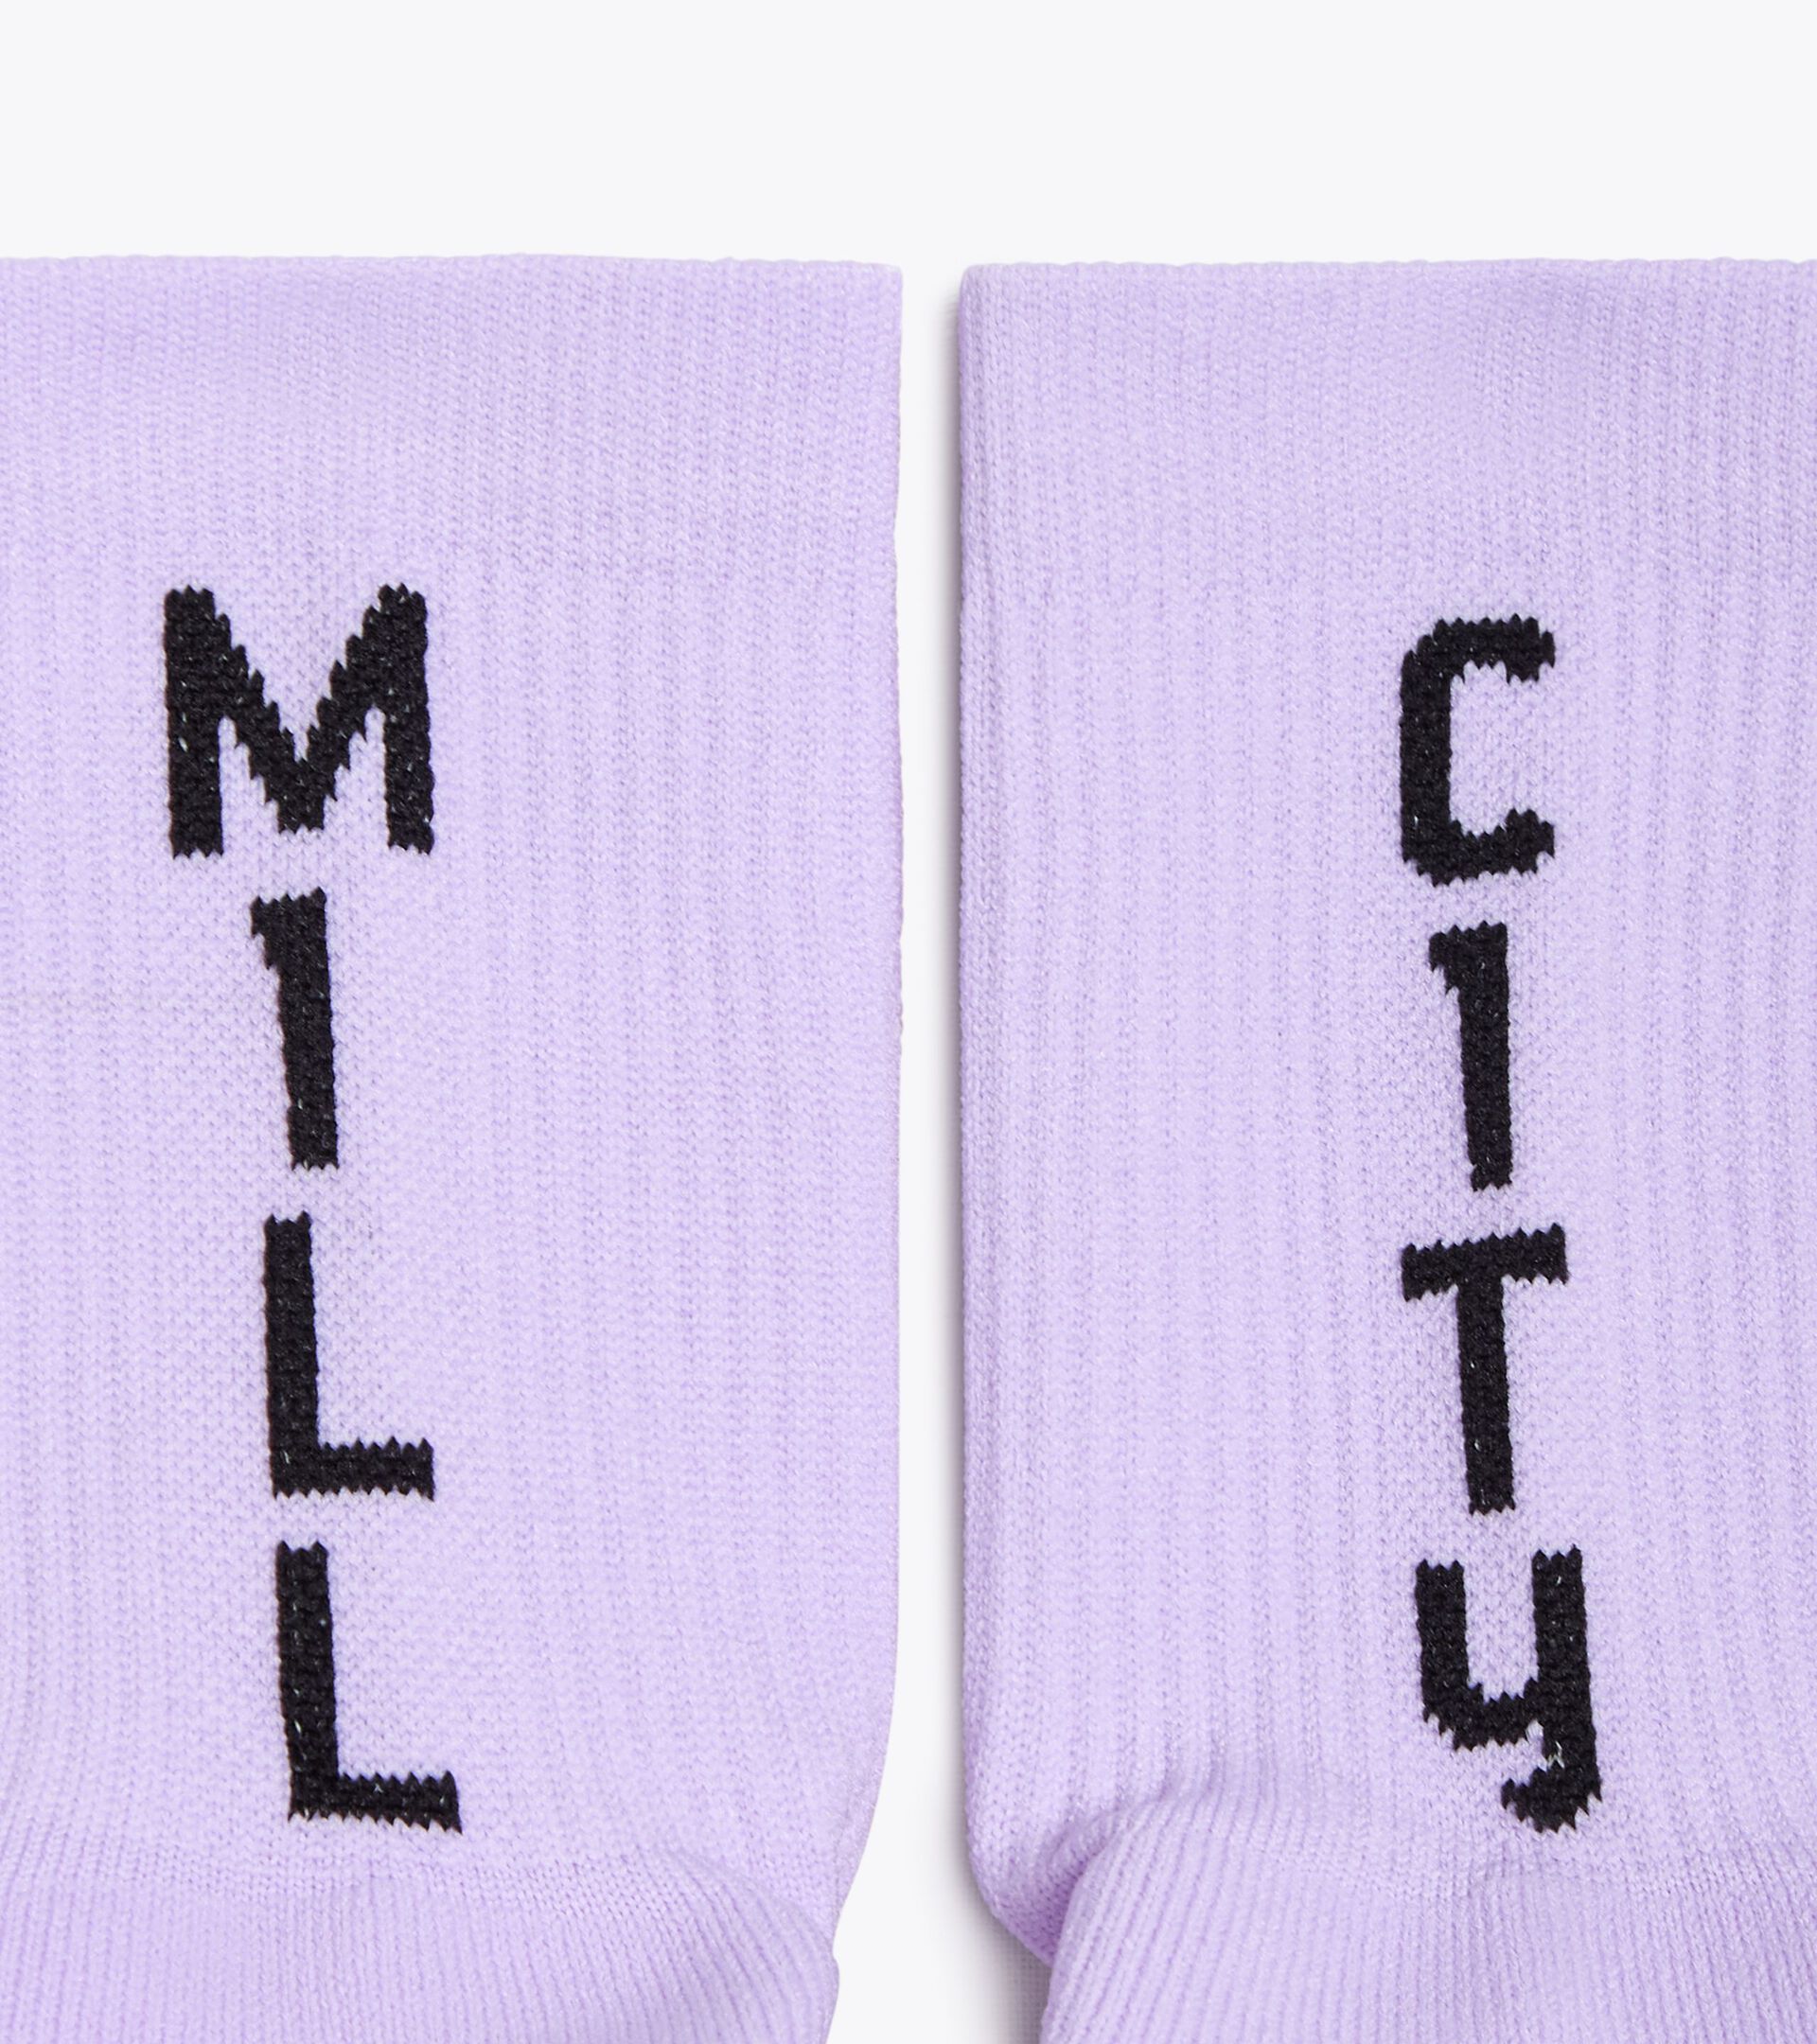 Chaussettes - Made in Italy - genre neutre SOCKS MILL CITY PUR LILAS - Diadora